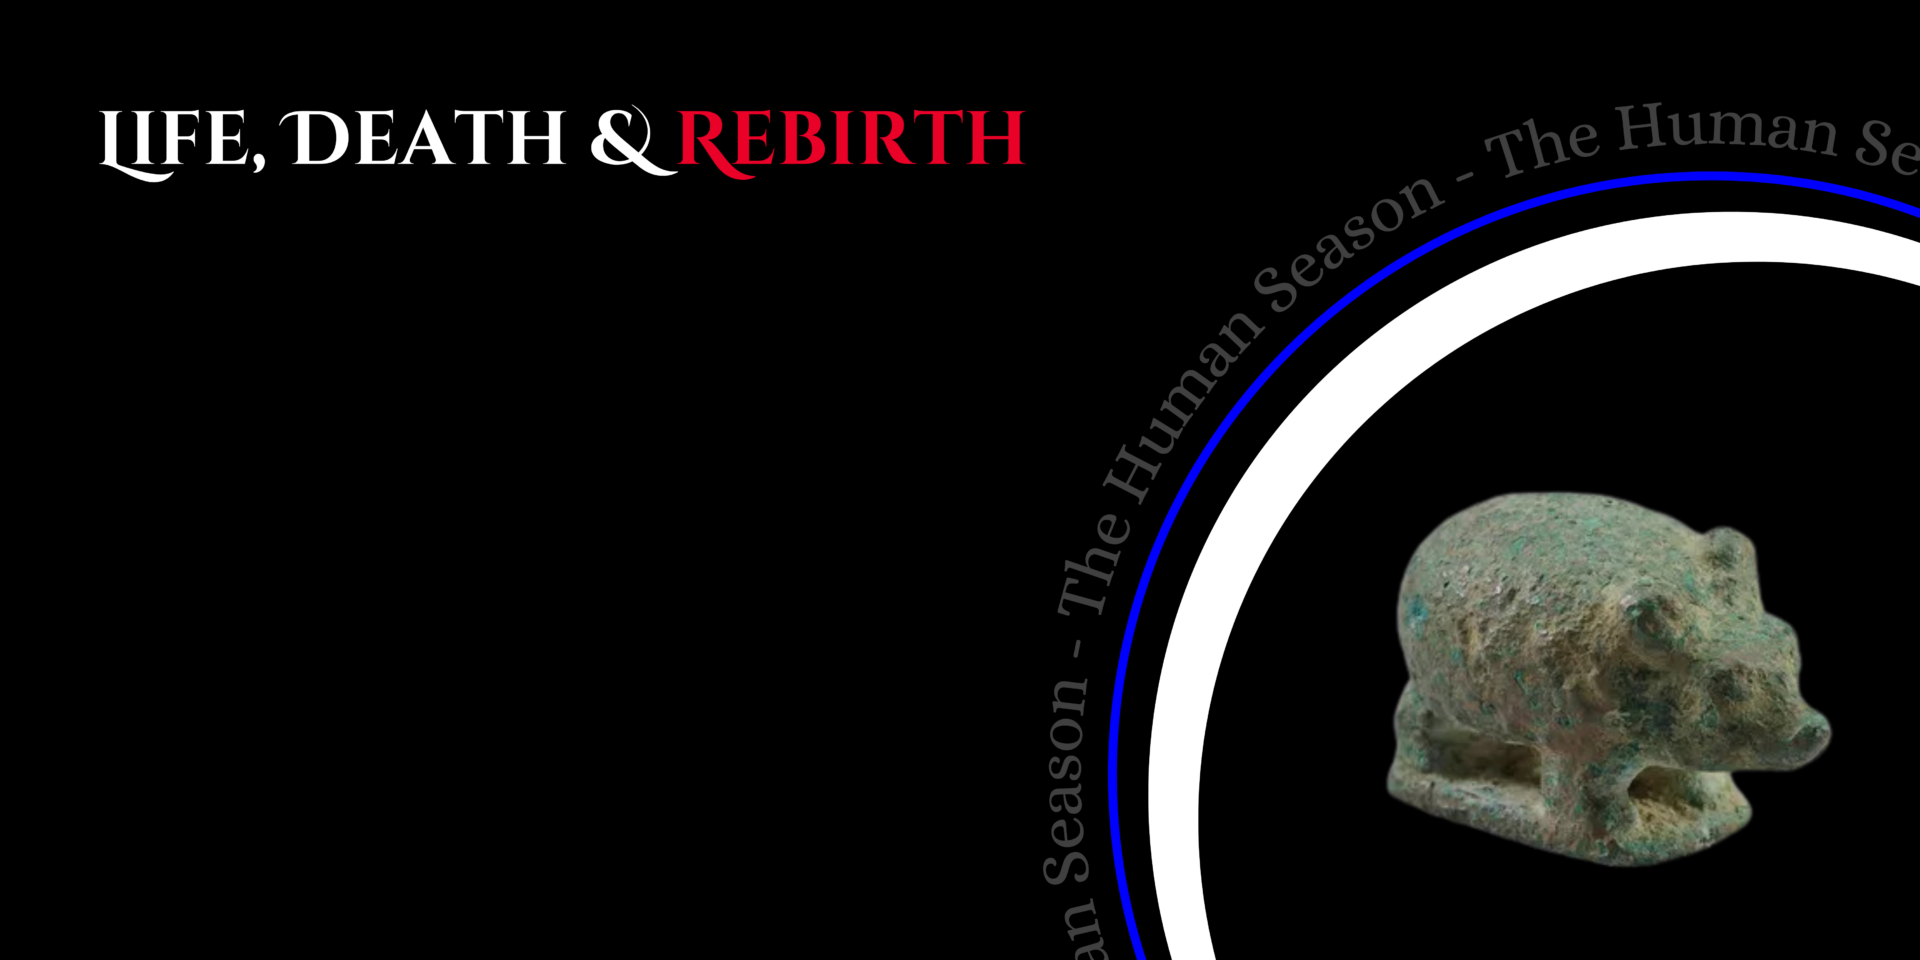 Let against a black background, text reads 'Life, Death & Rebirth'. In the bottom right hand corner of the banner is the small sculpture of a hedgehog featured below, in a circle meant to imitate a hibernaculum. 